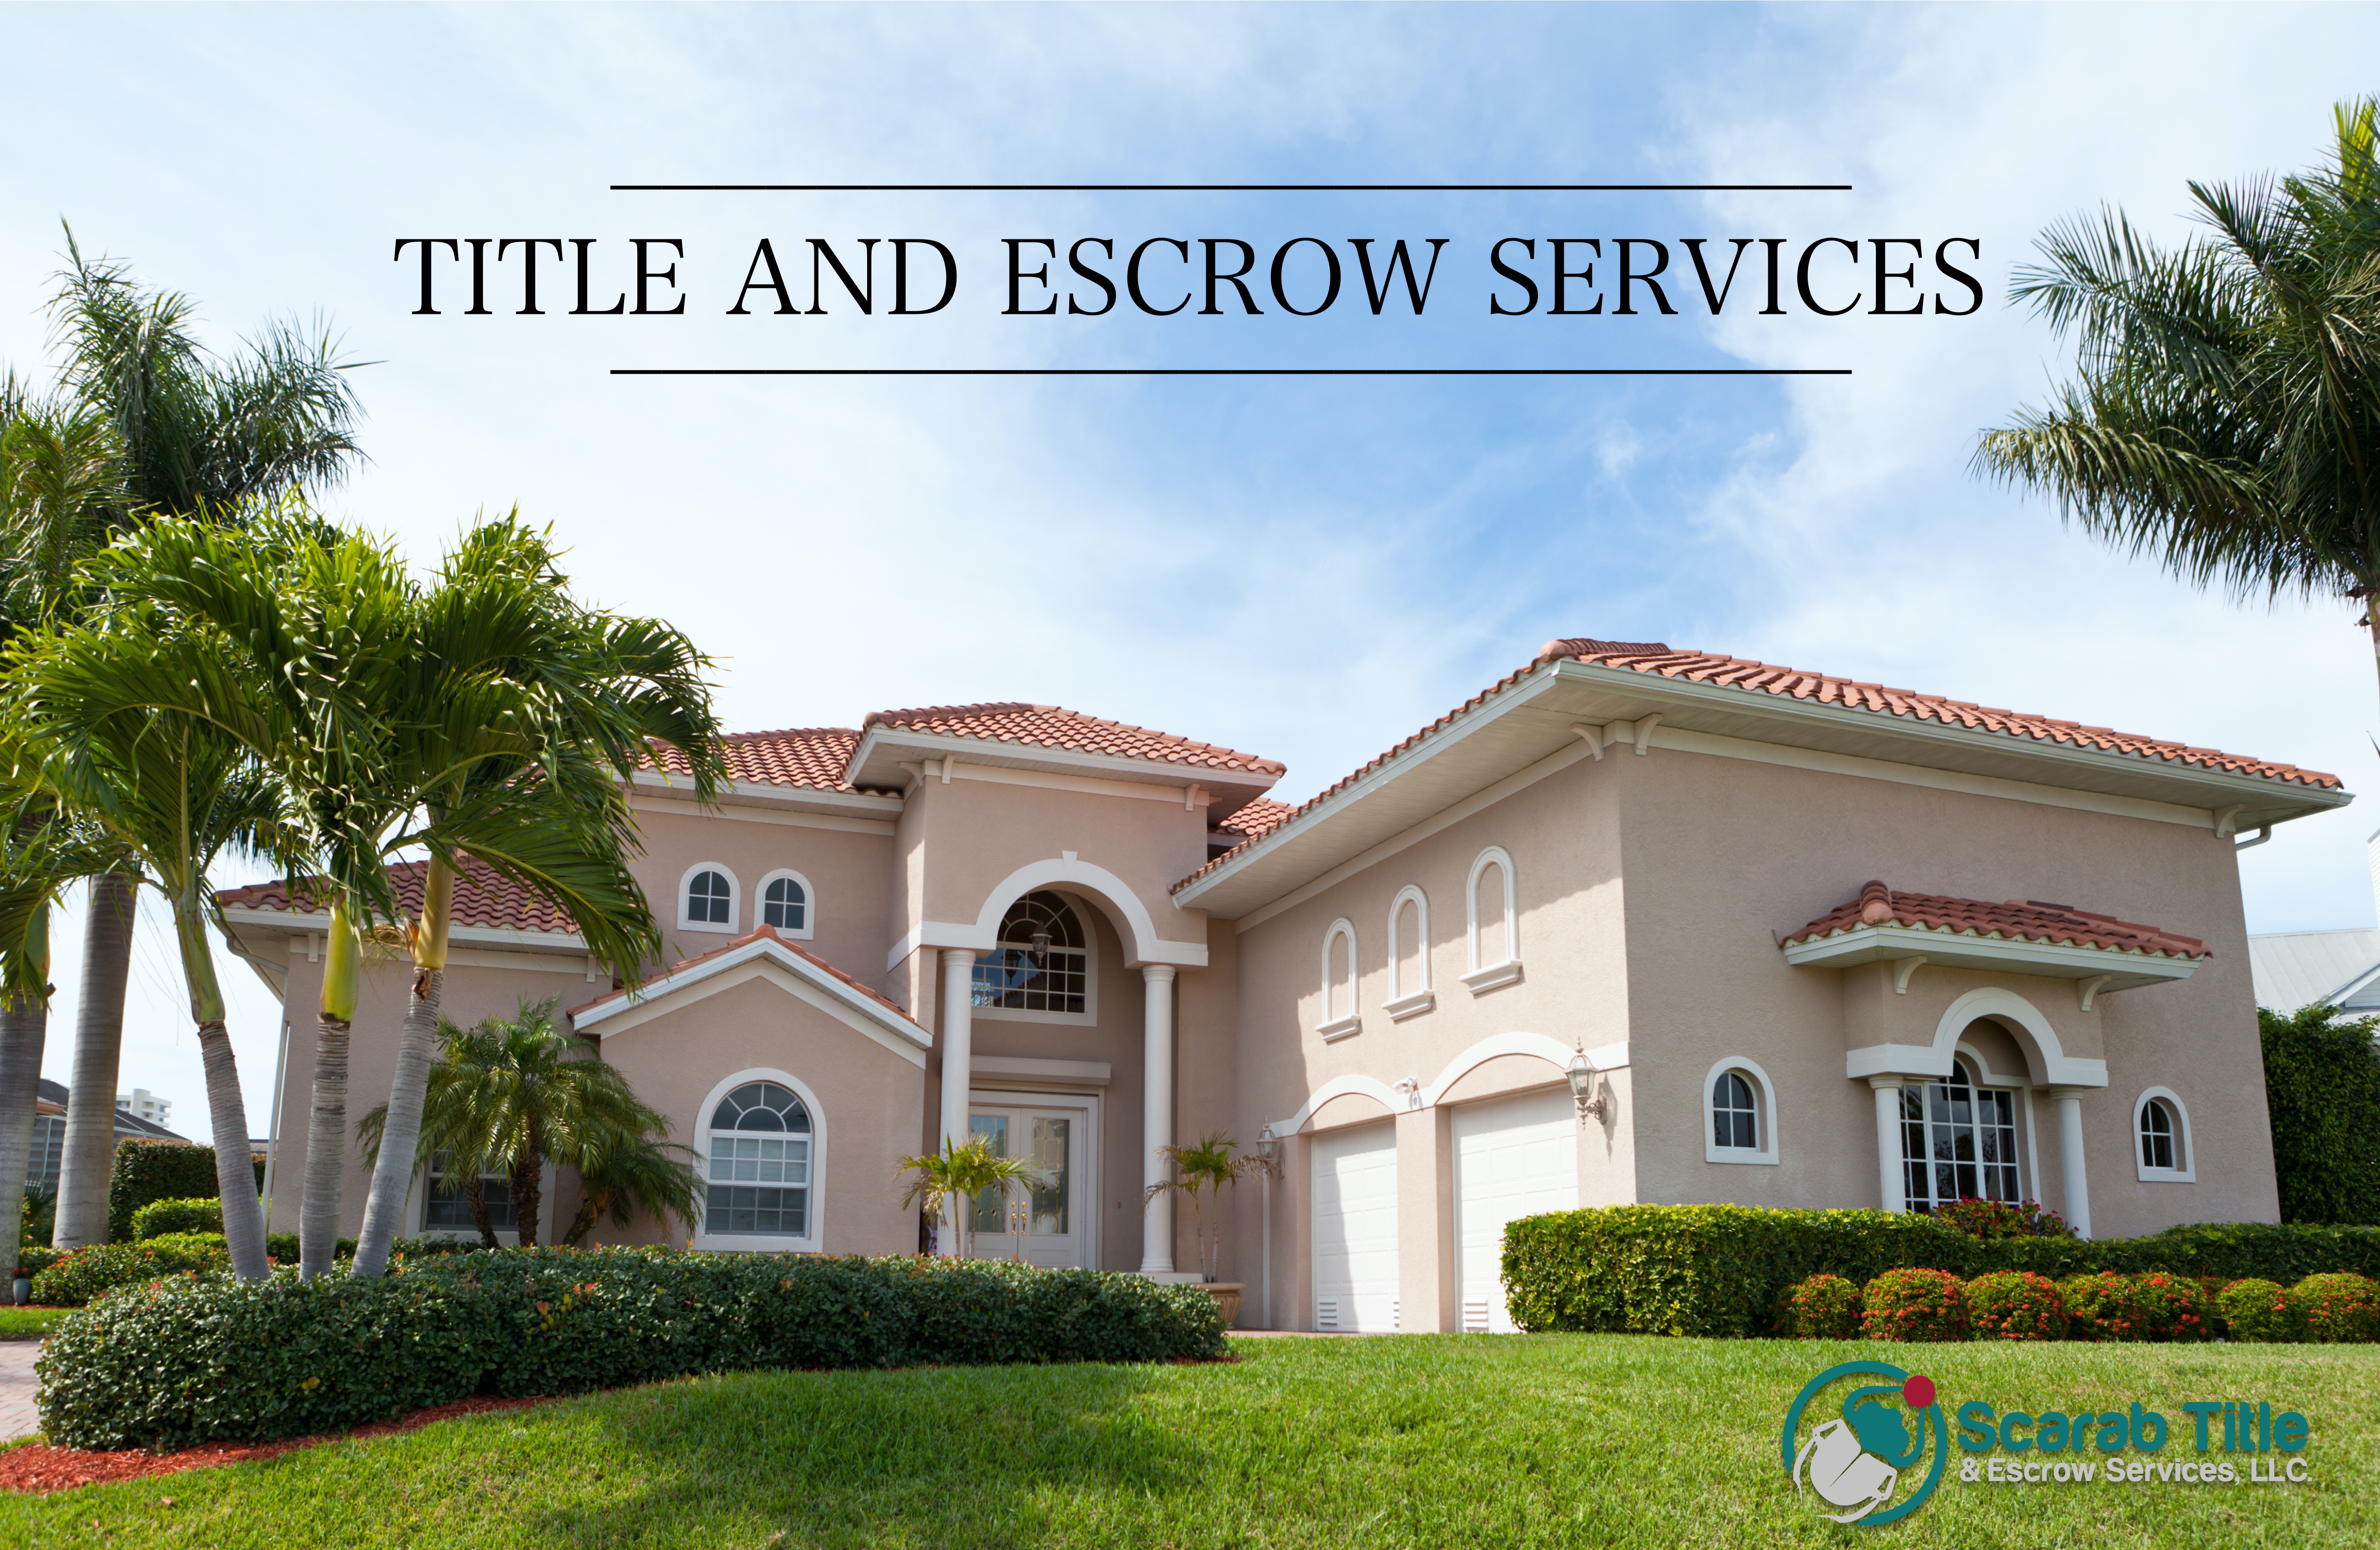 Title_and_Escrow_Services.jpg